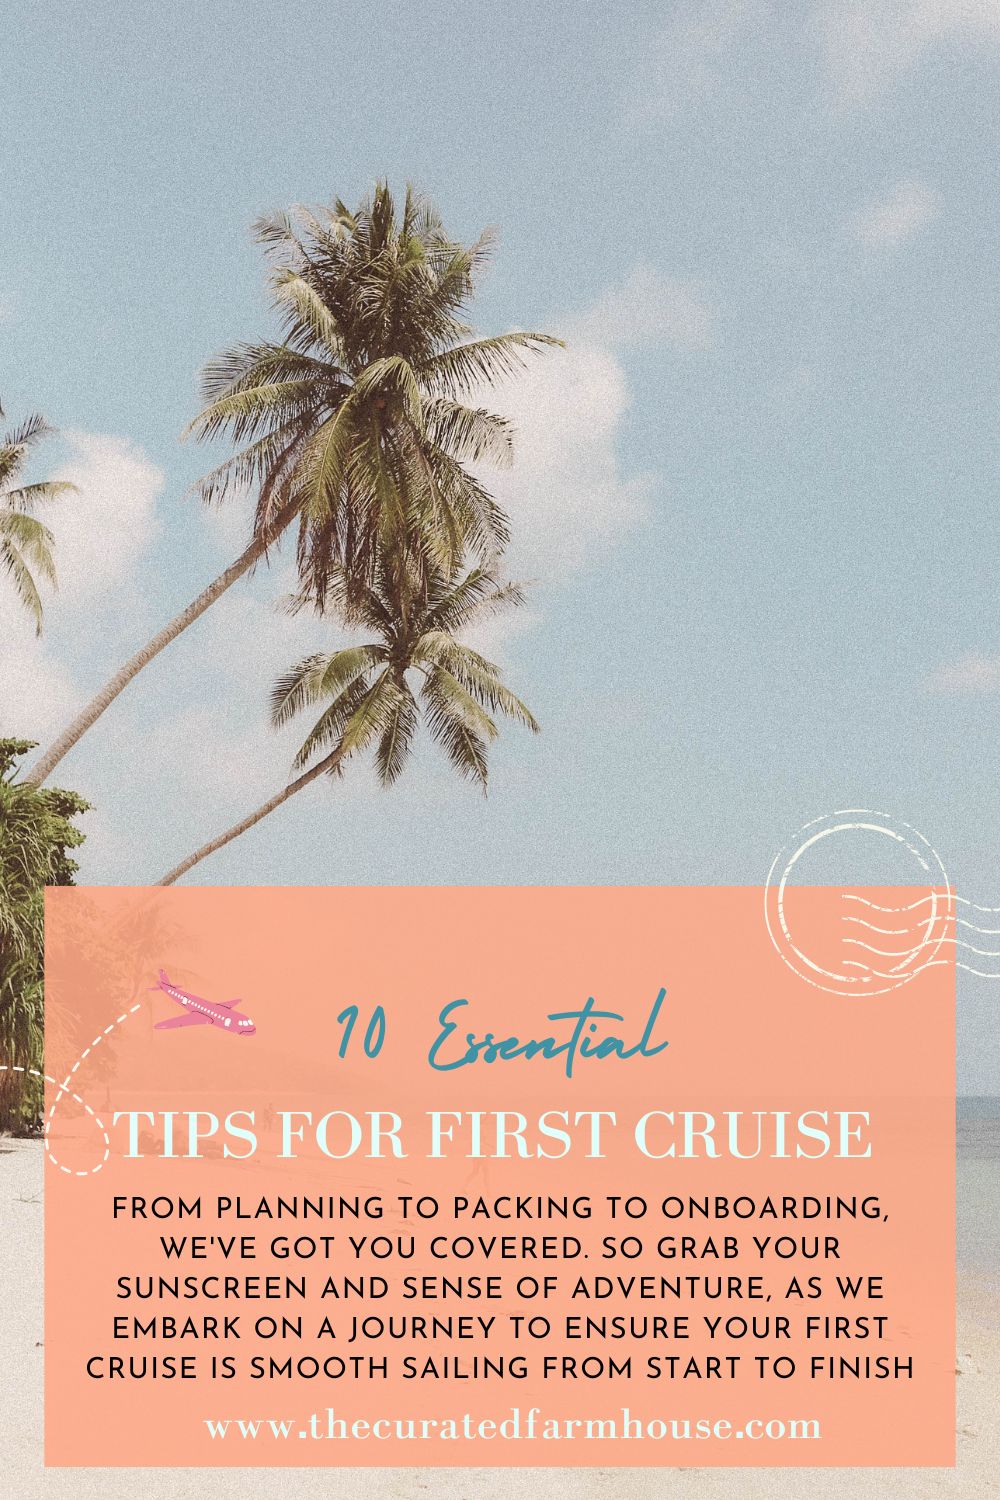 Cruise Like a Pro: Essential Tips for Your First Cruise